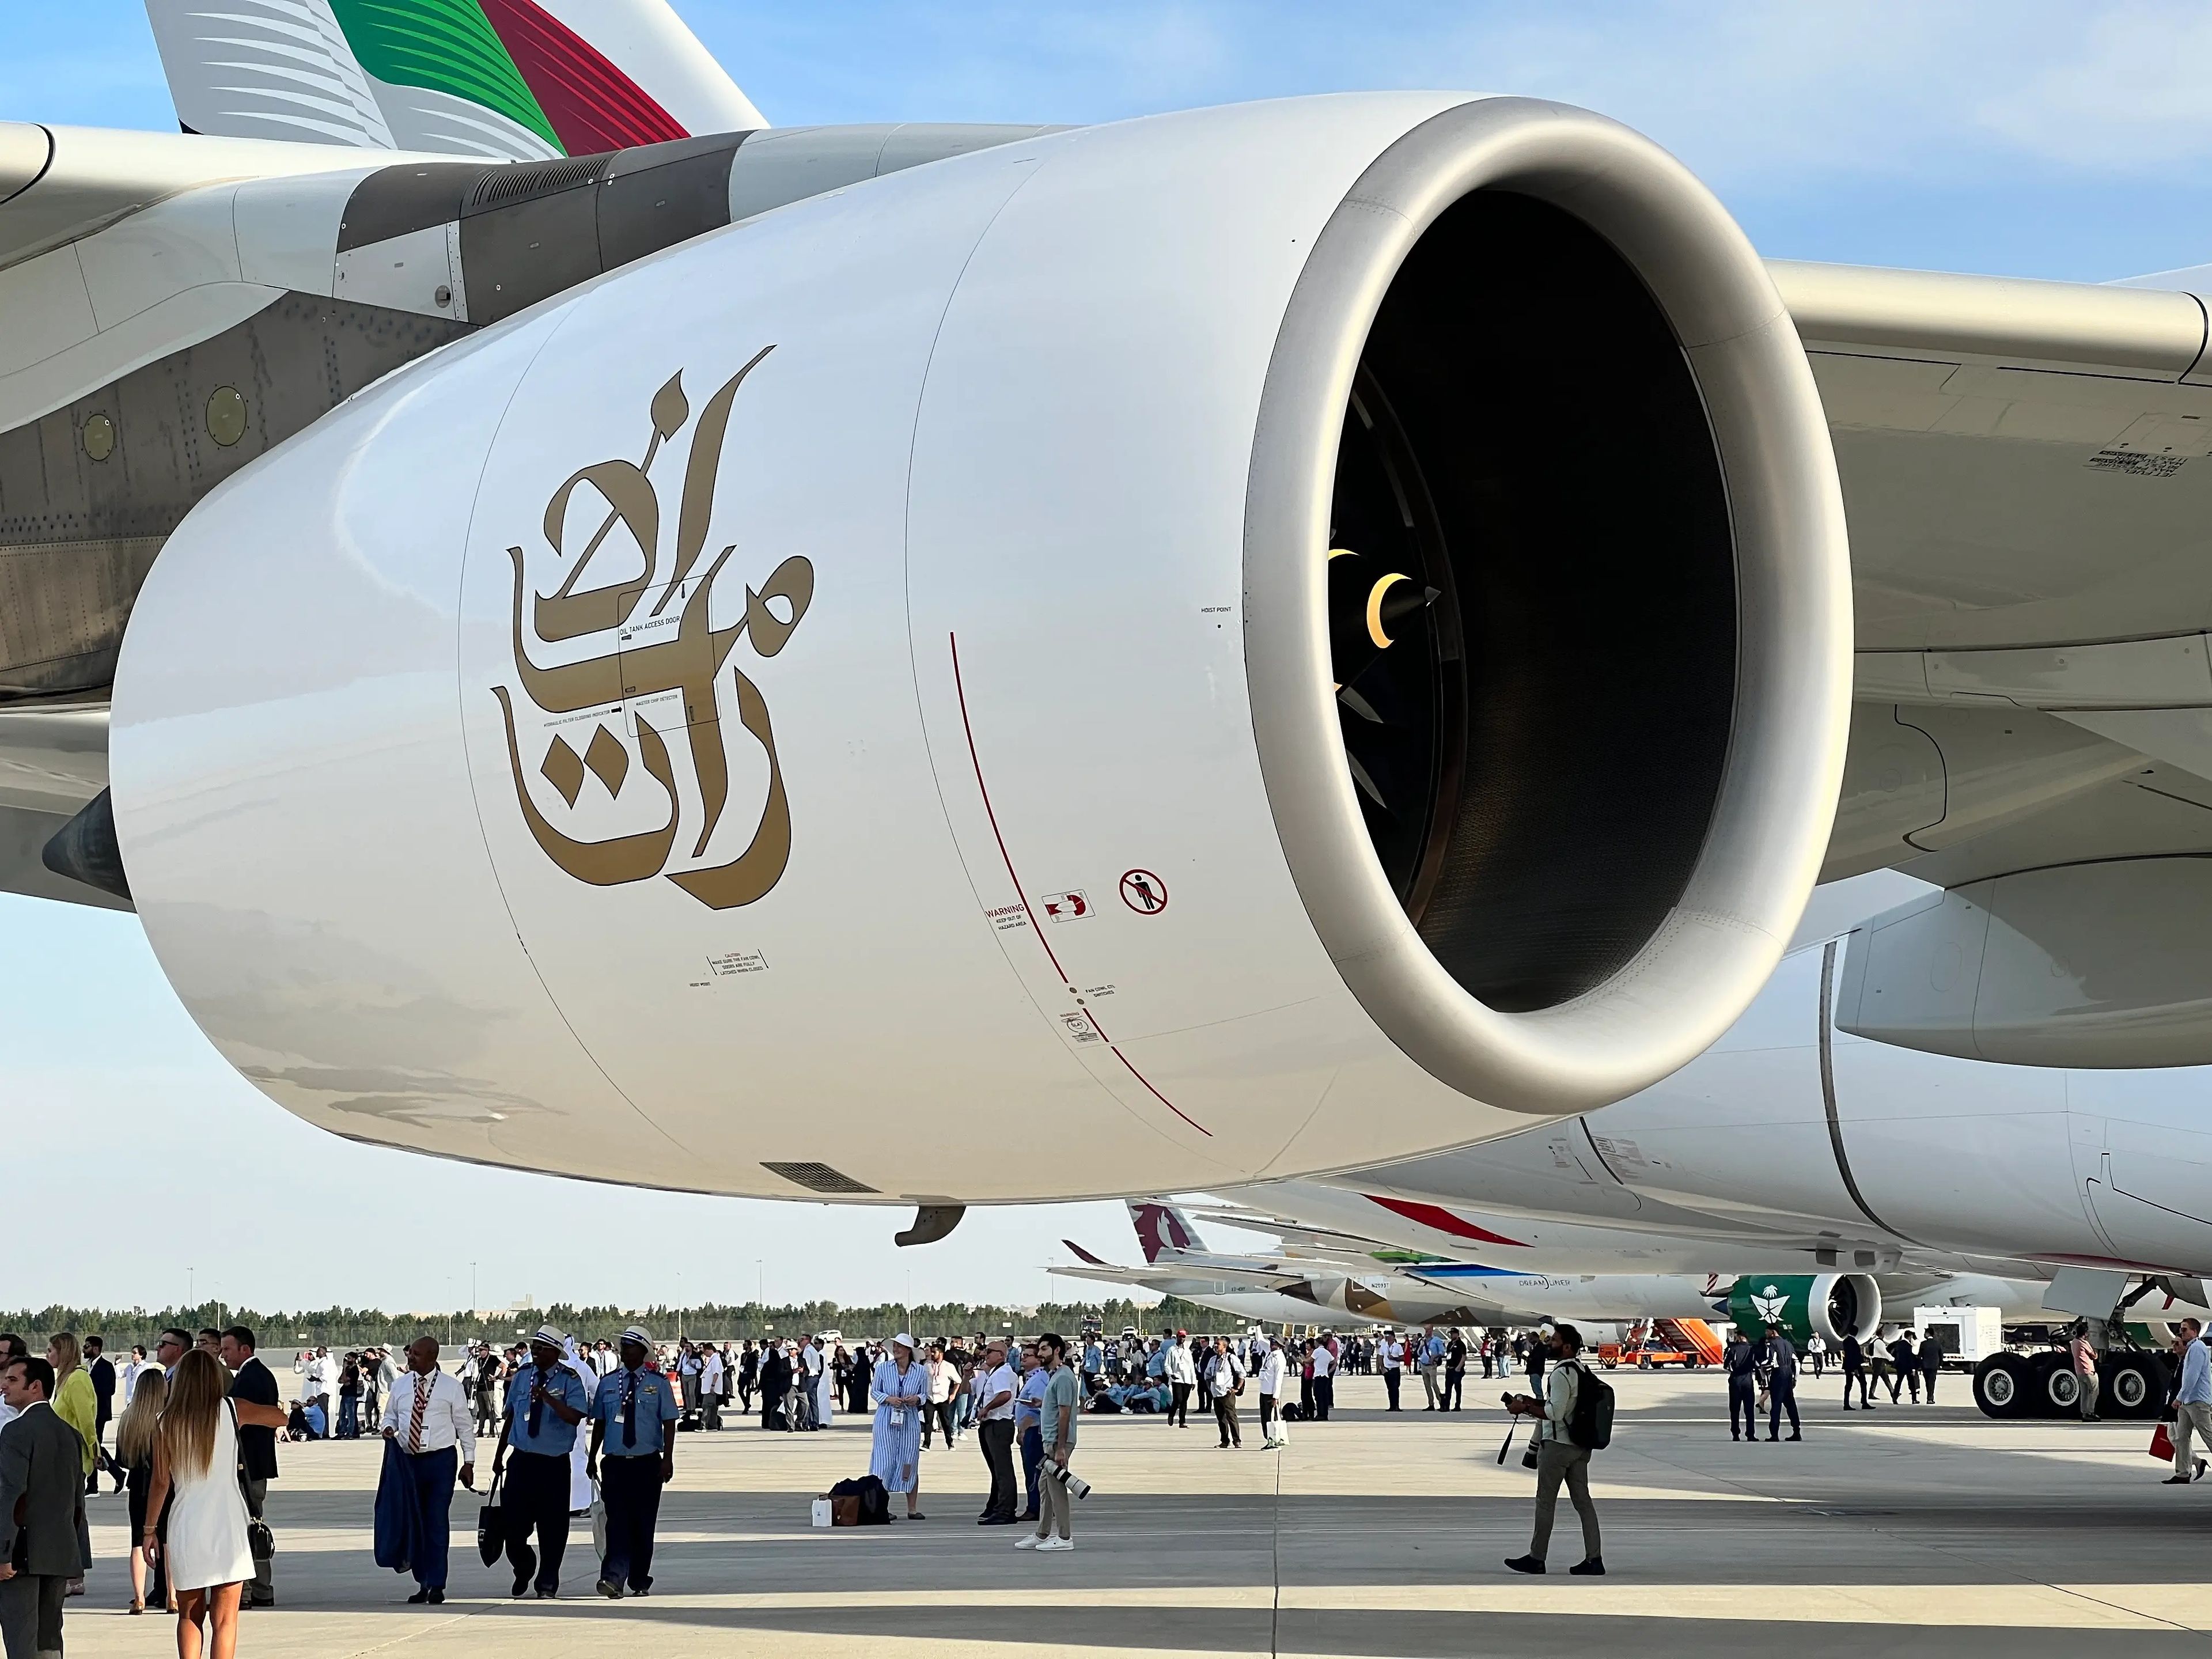 A close-up of an engine on an Emirates Airbus A380-800 at the Dubai Airshow, with people walking underneath and a crowd in the background